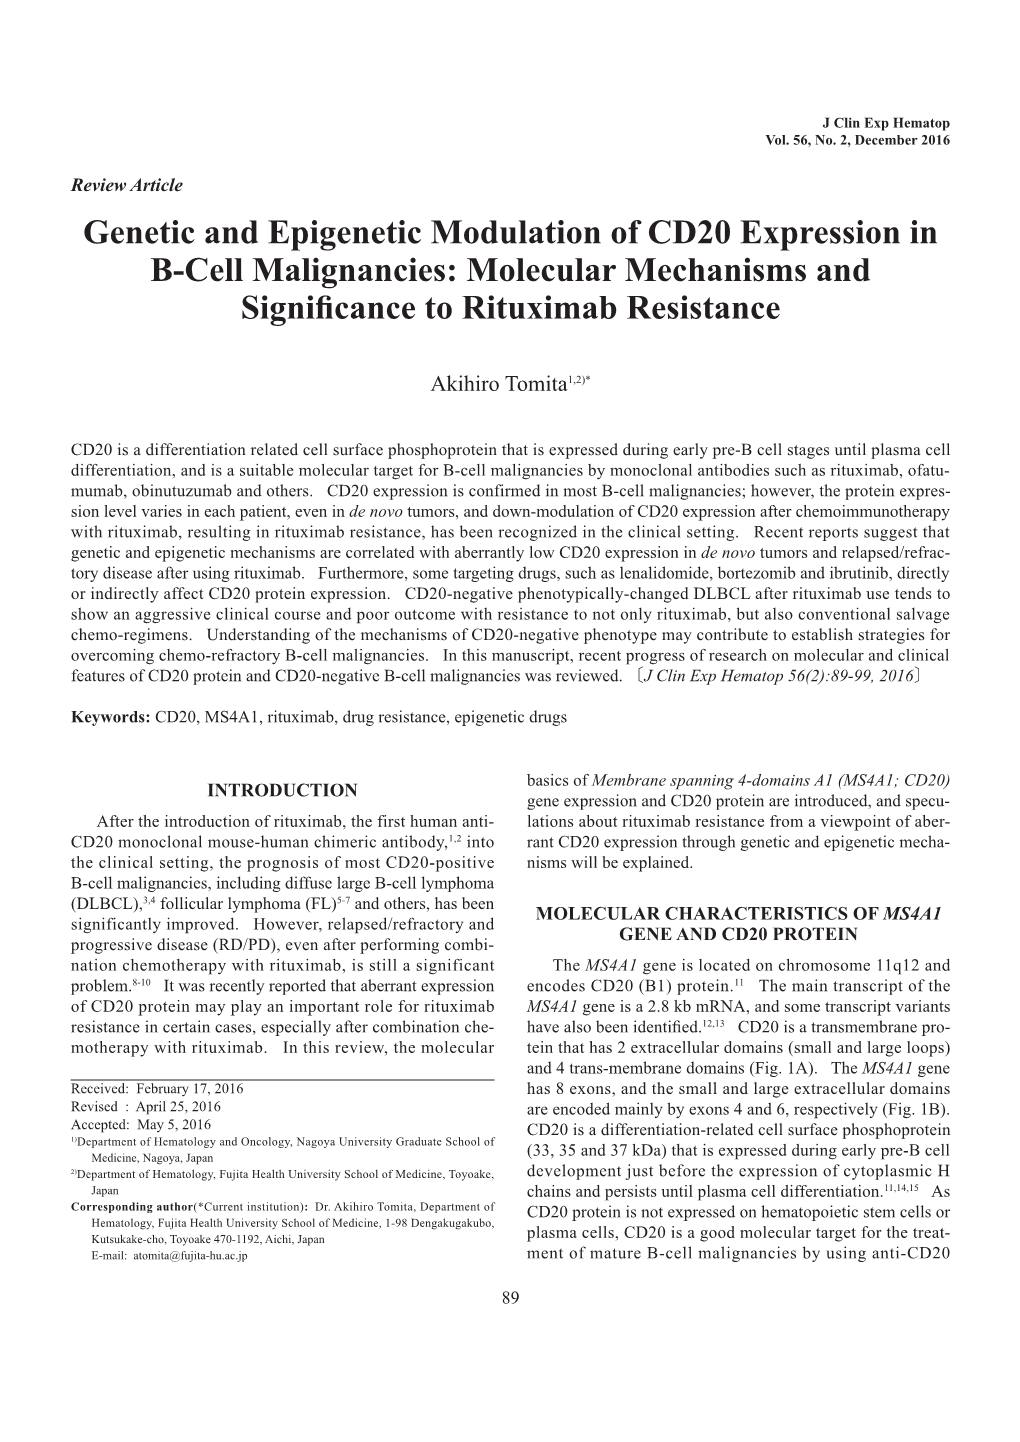 Genetic and Epigenetic Modulation of CD20 Expression in B-Cell Malignancies: Molecular Mechanisms and Significance to Rituximab Resistance